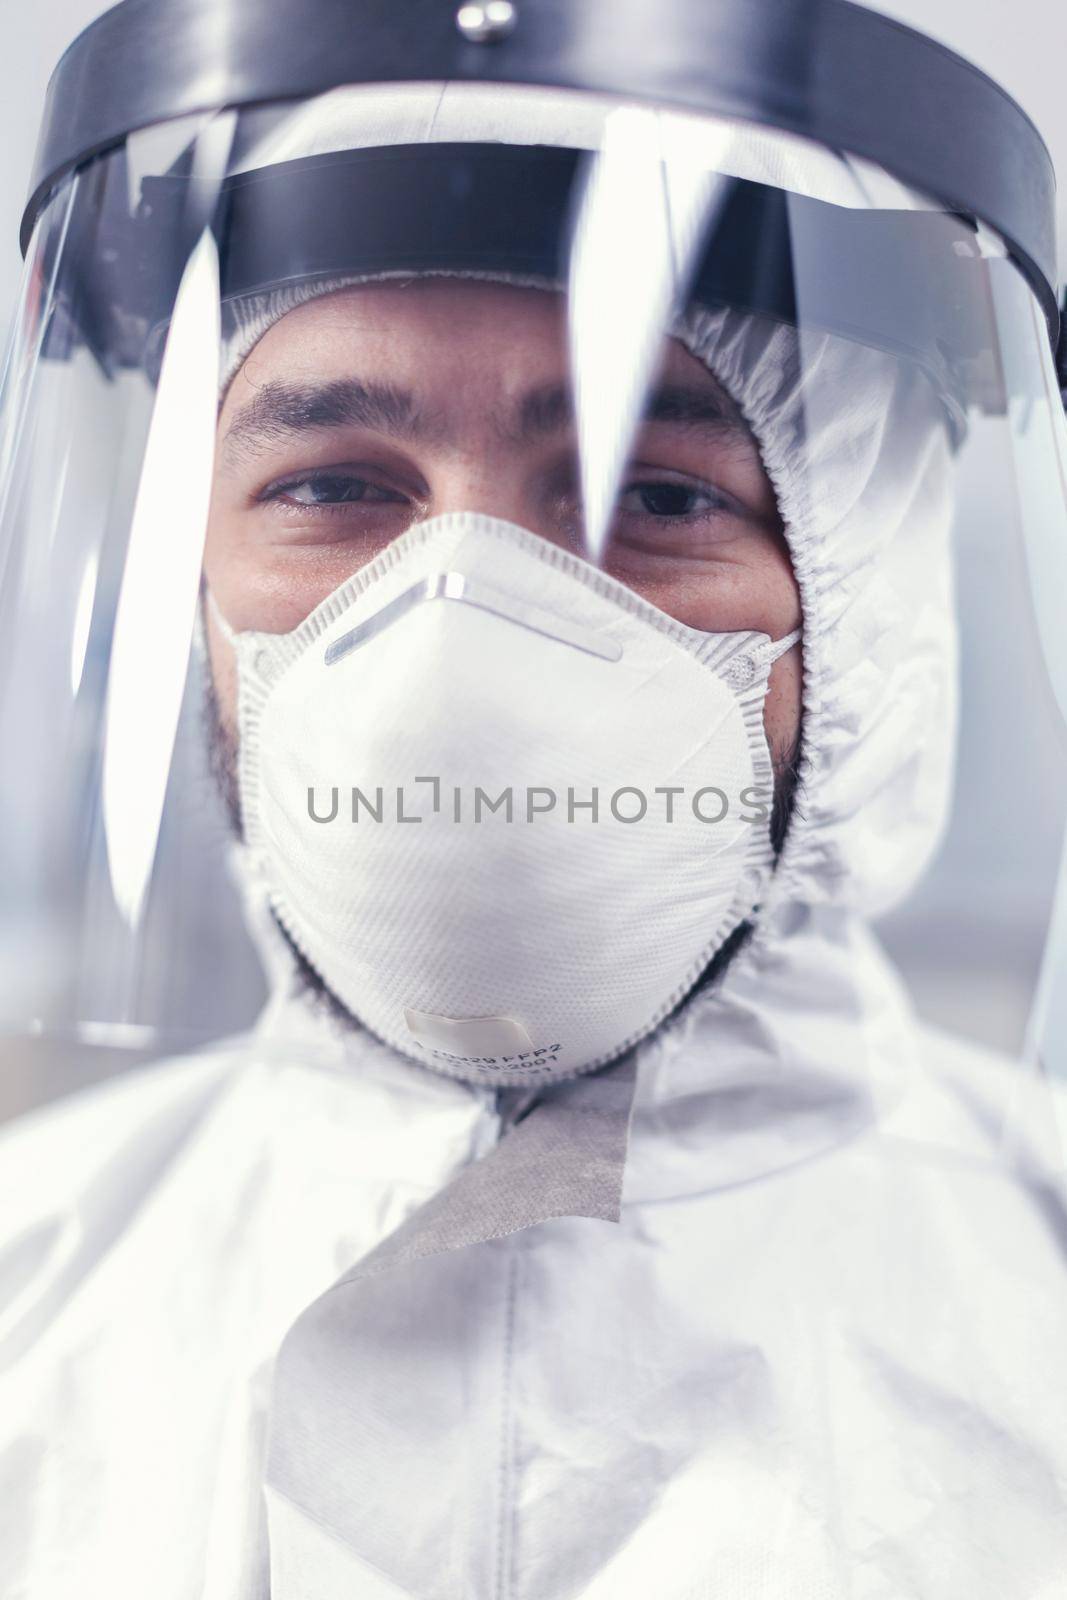 Sad medical technician wearing ppe uniform with face shield Overworked researcher dressed in protective suit against invection with coronavirus during global epidemic.